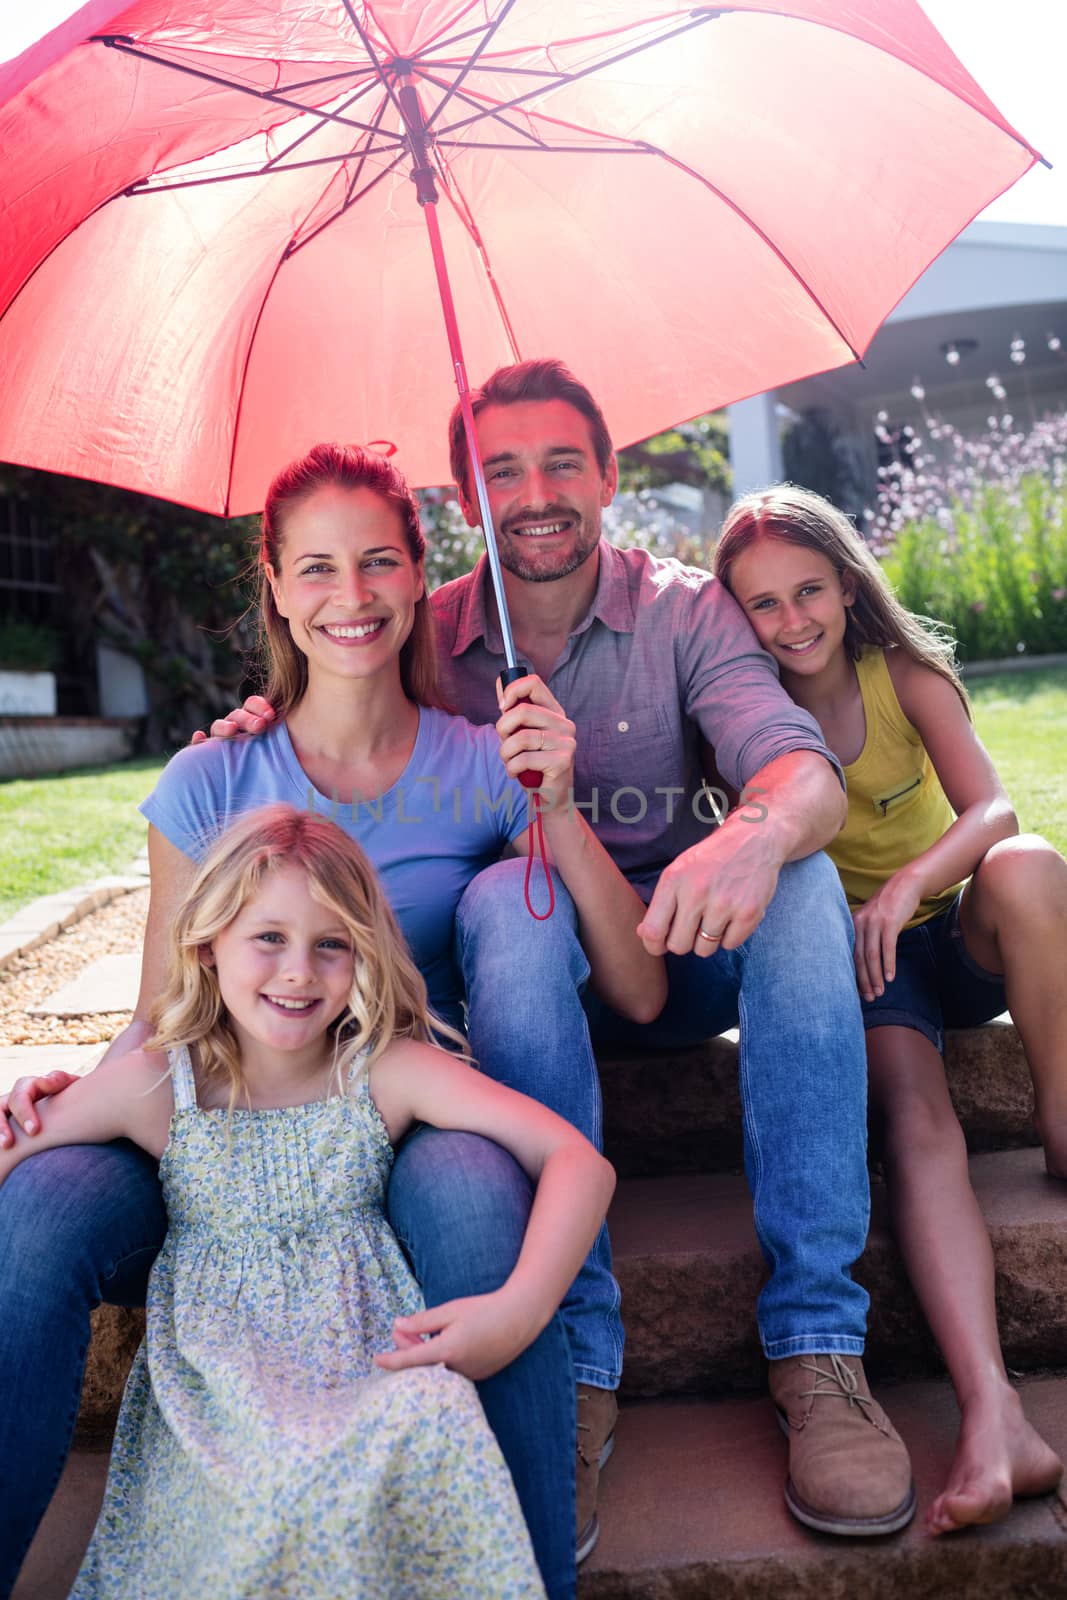 Happy family sitting in garden under a red umbrella on a sunny day